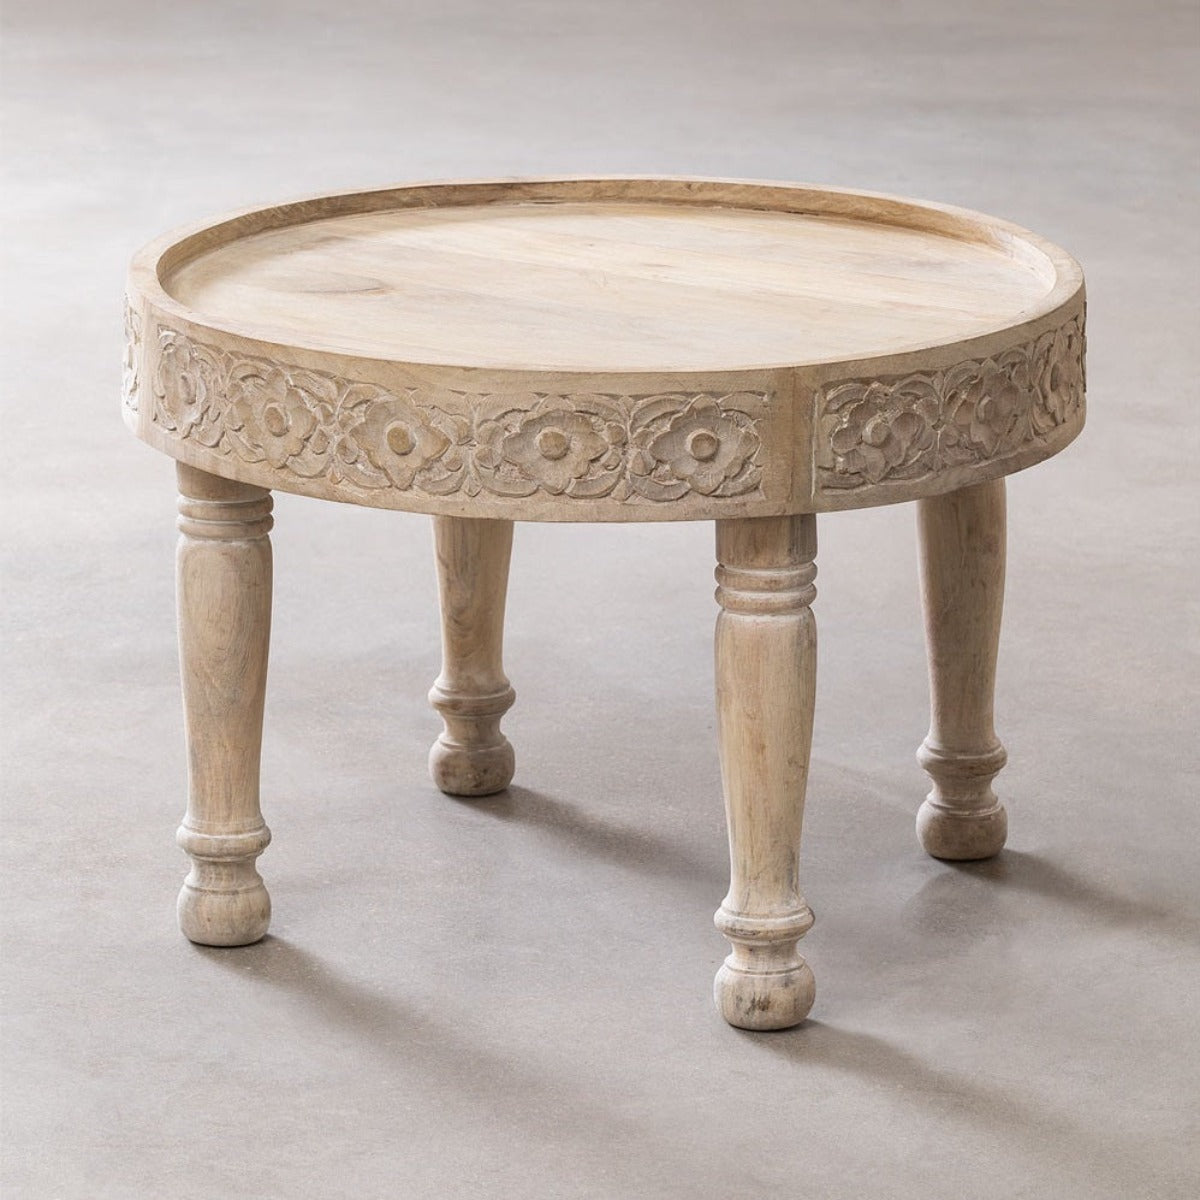 Woodworm Furniture | Carved Round Table | Coffee Table| Head Work  | Overall View